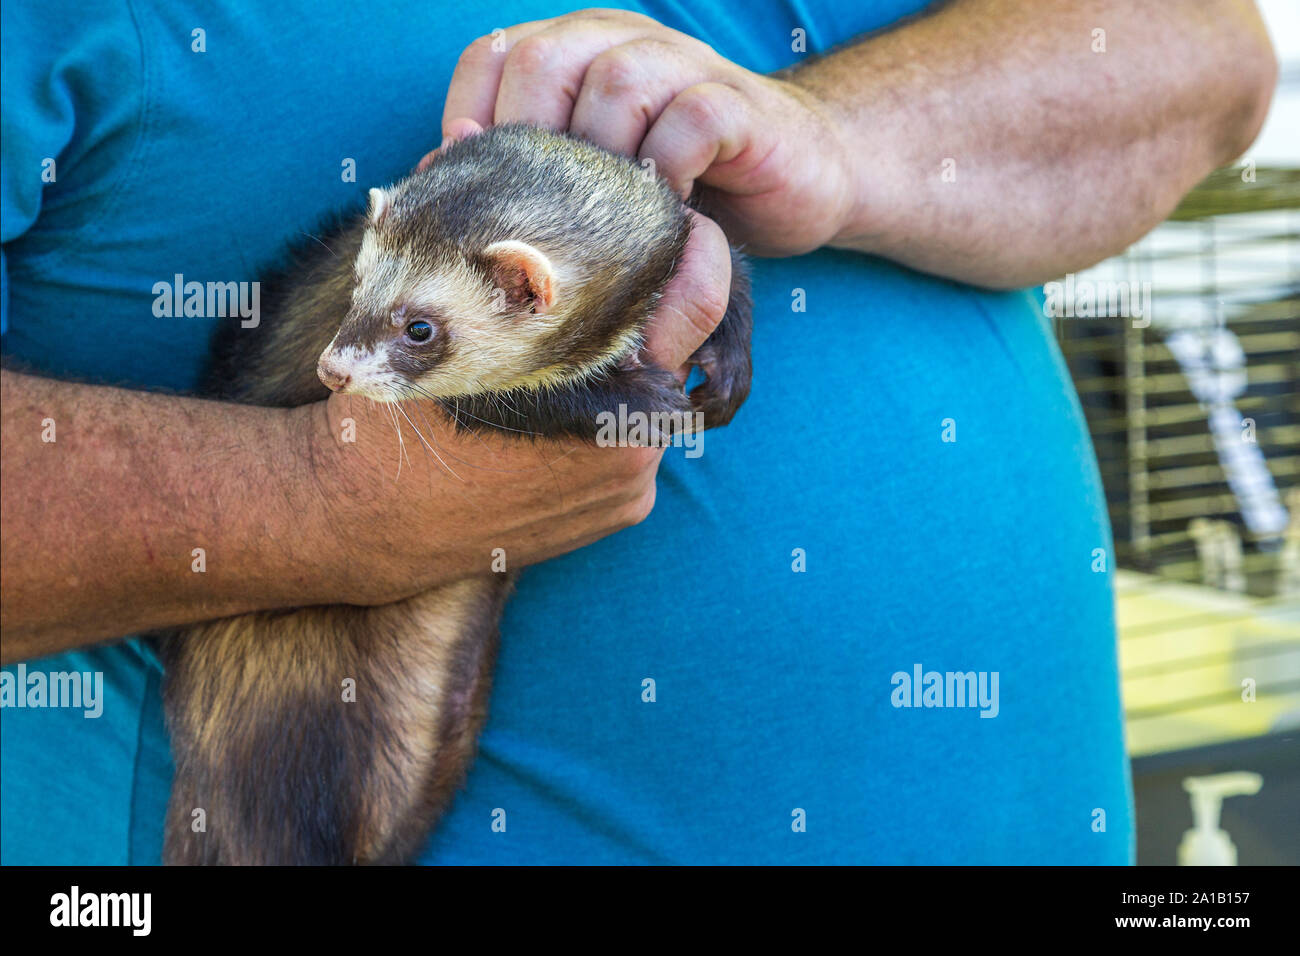 Detail of a man's hands holding a ferret. Stock Photo